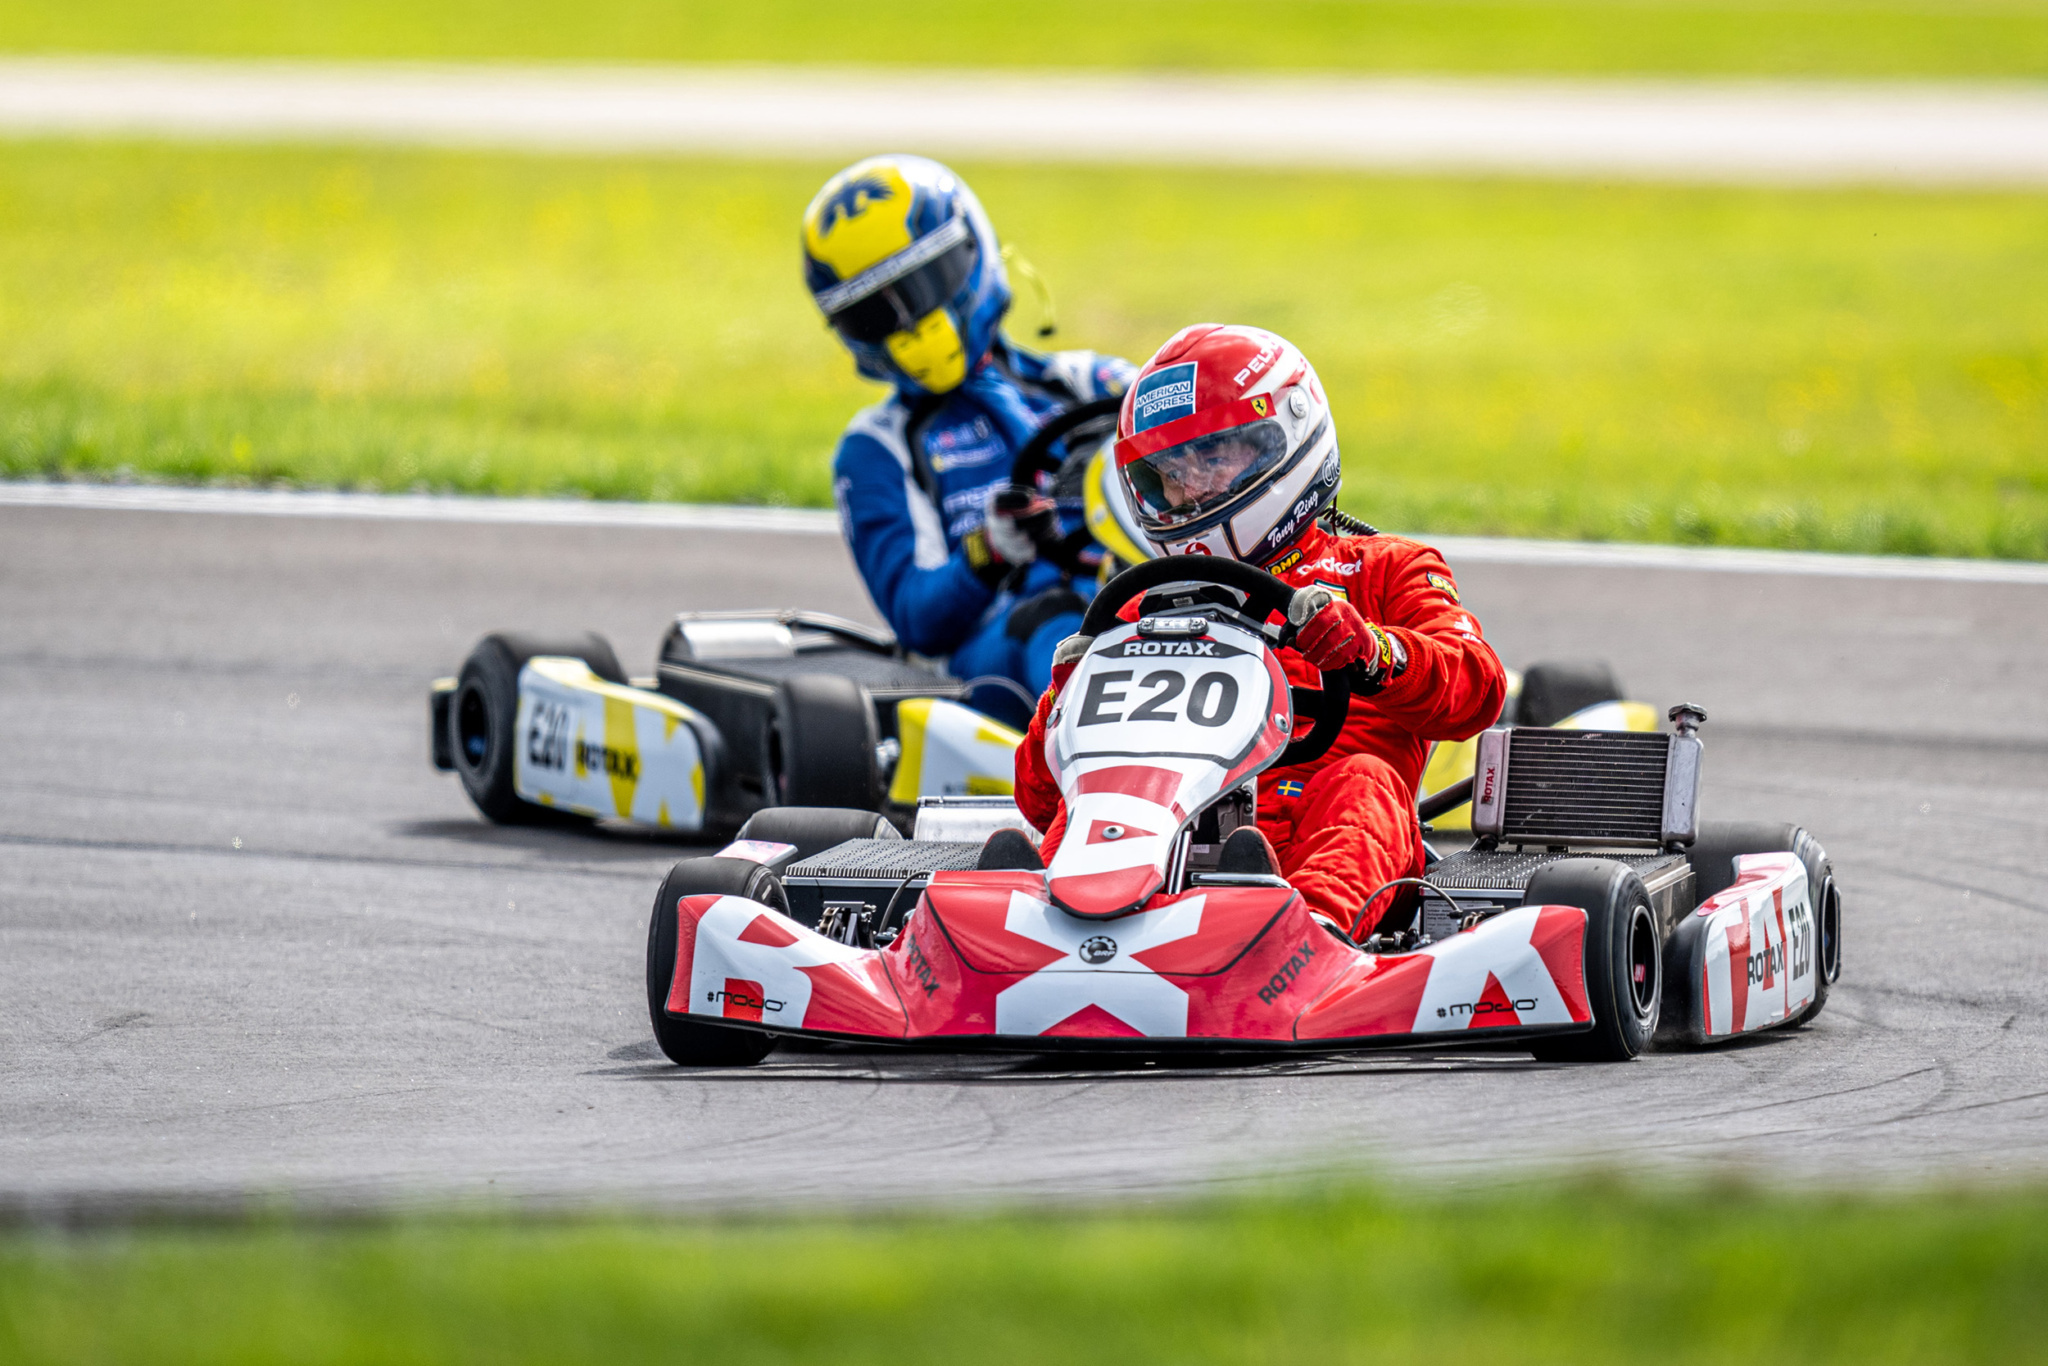 Testing the track in the Rotax E20 E Kart